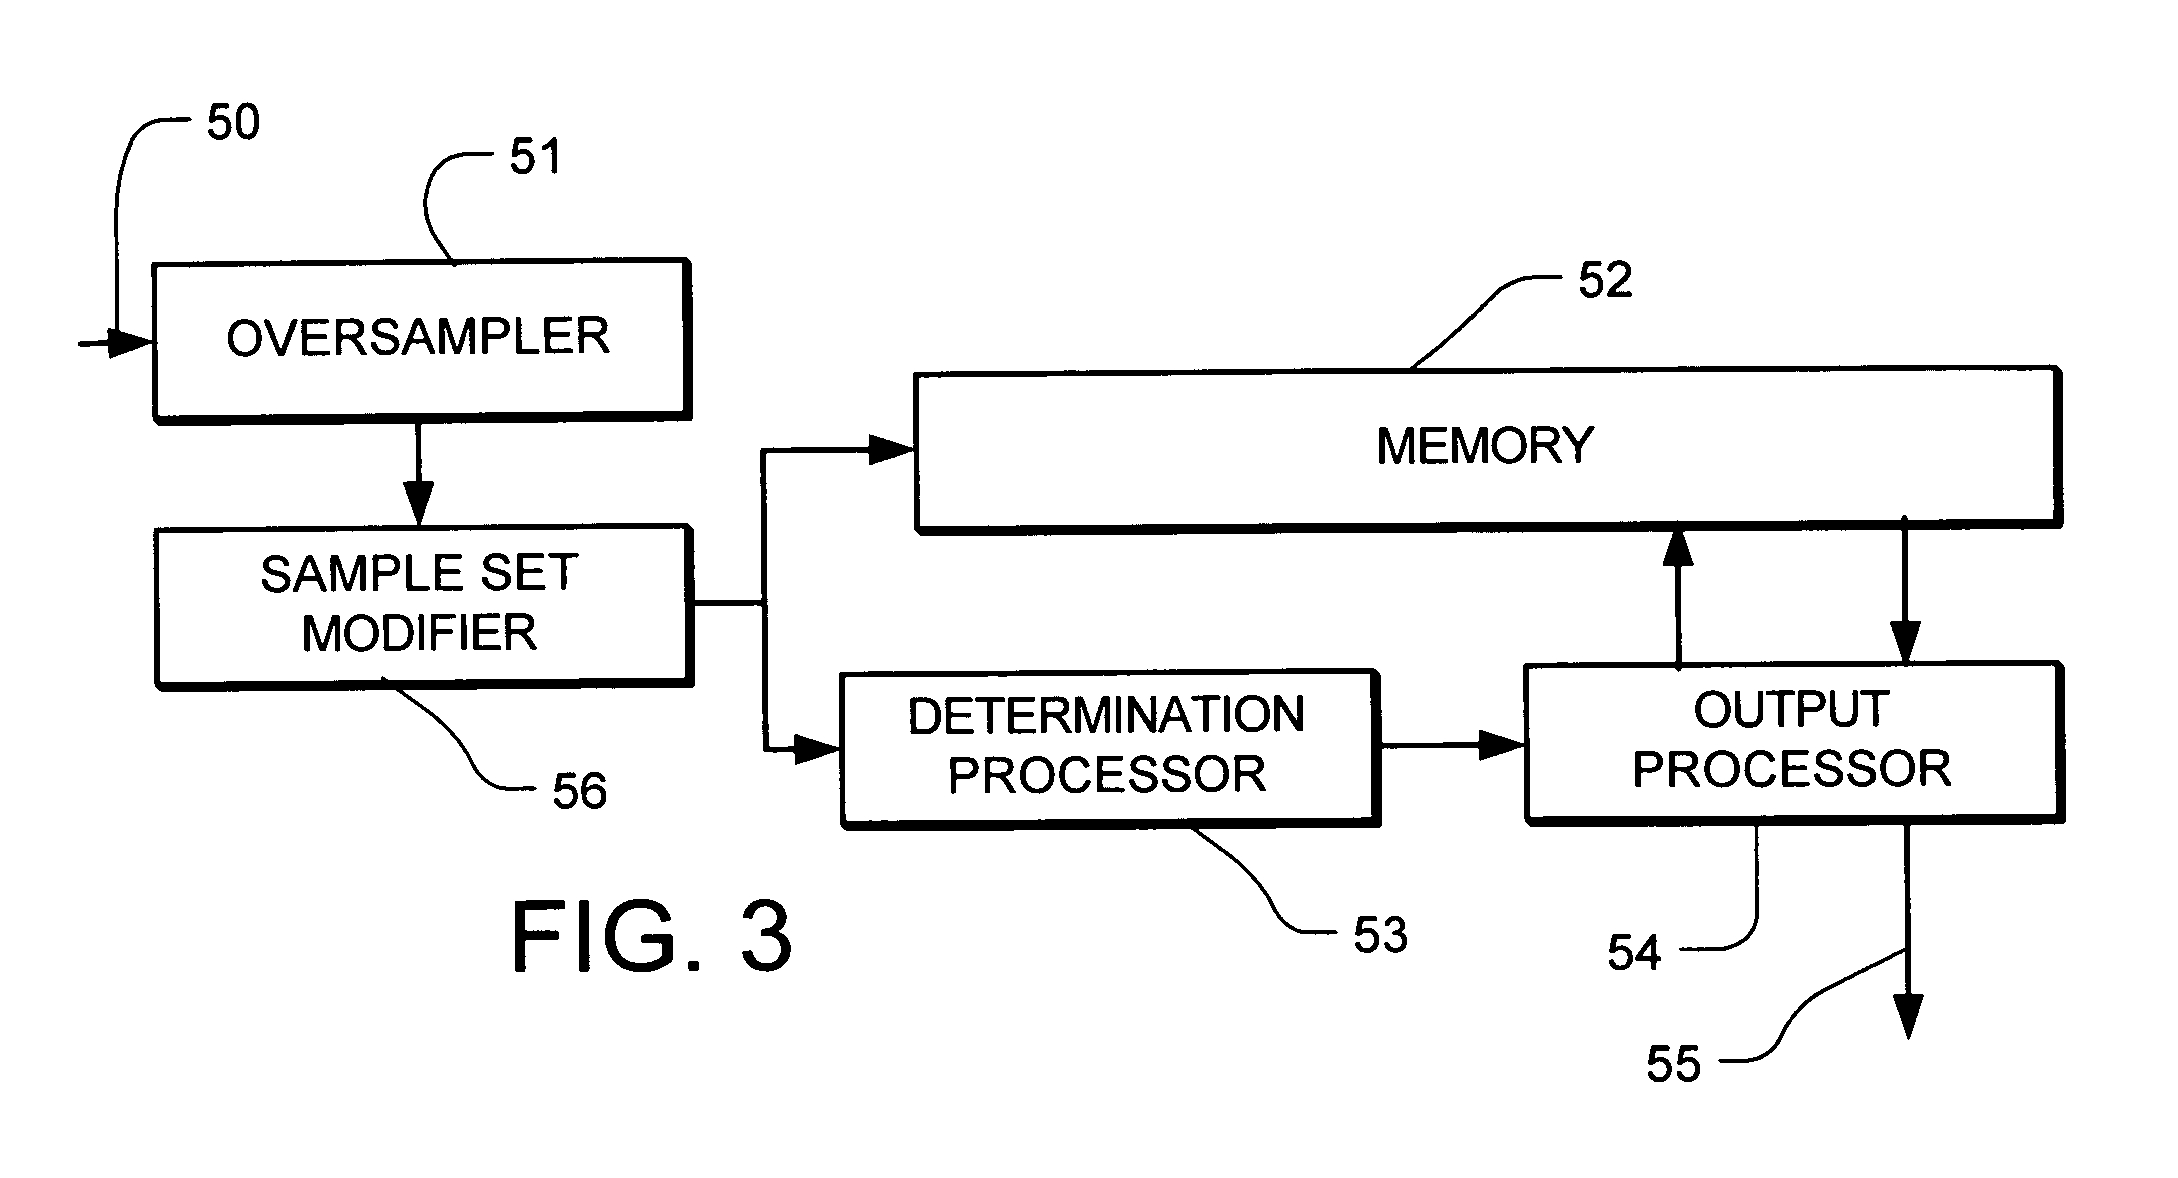 Method and apparatus for data recovery